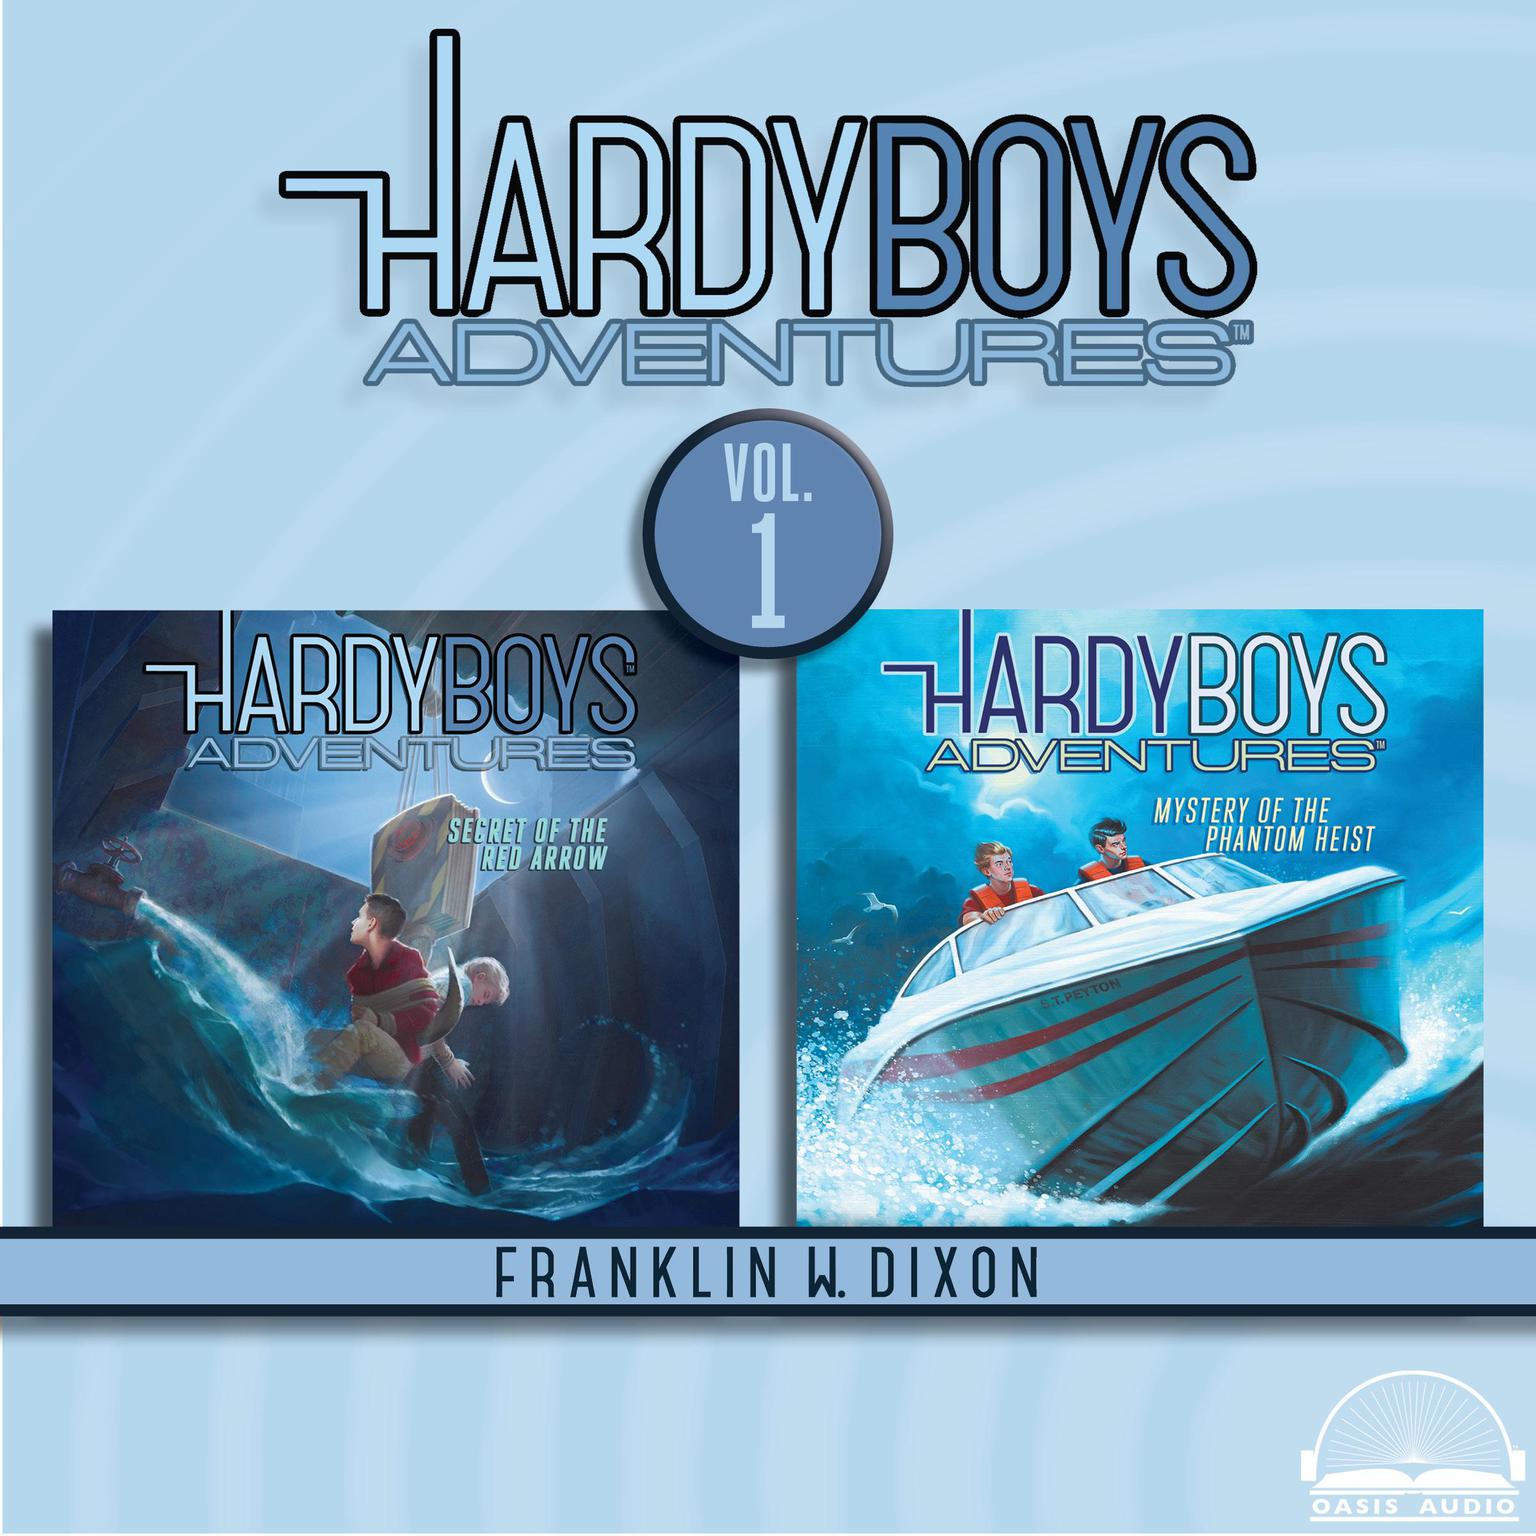 Hardy Boys Adventures Collection Volume 1: Secret of the Red Arrow, Mystery of the Phantom Heist Audiobook, by Franklin W. Dixon